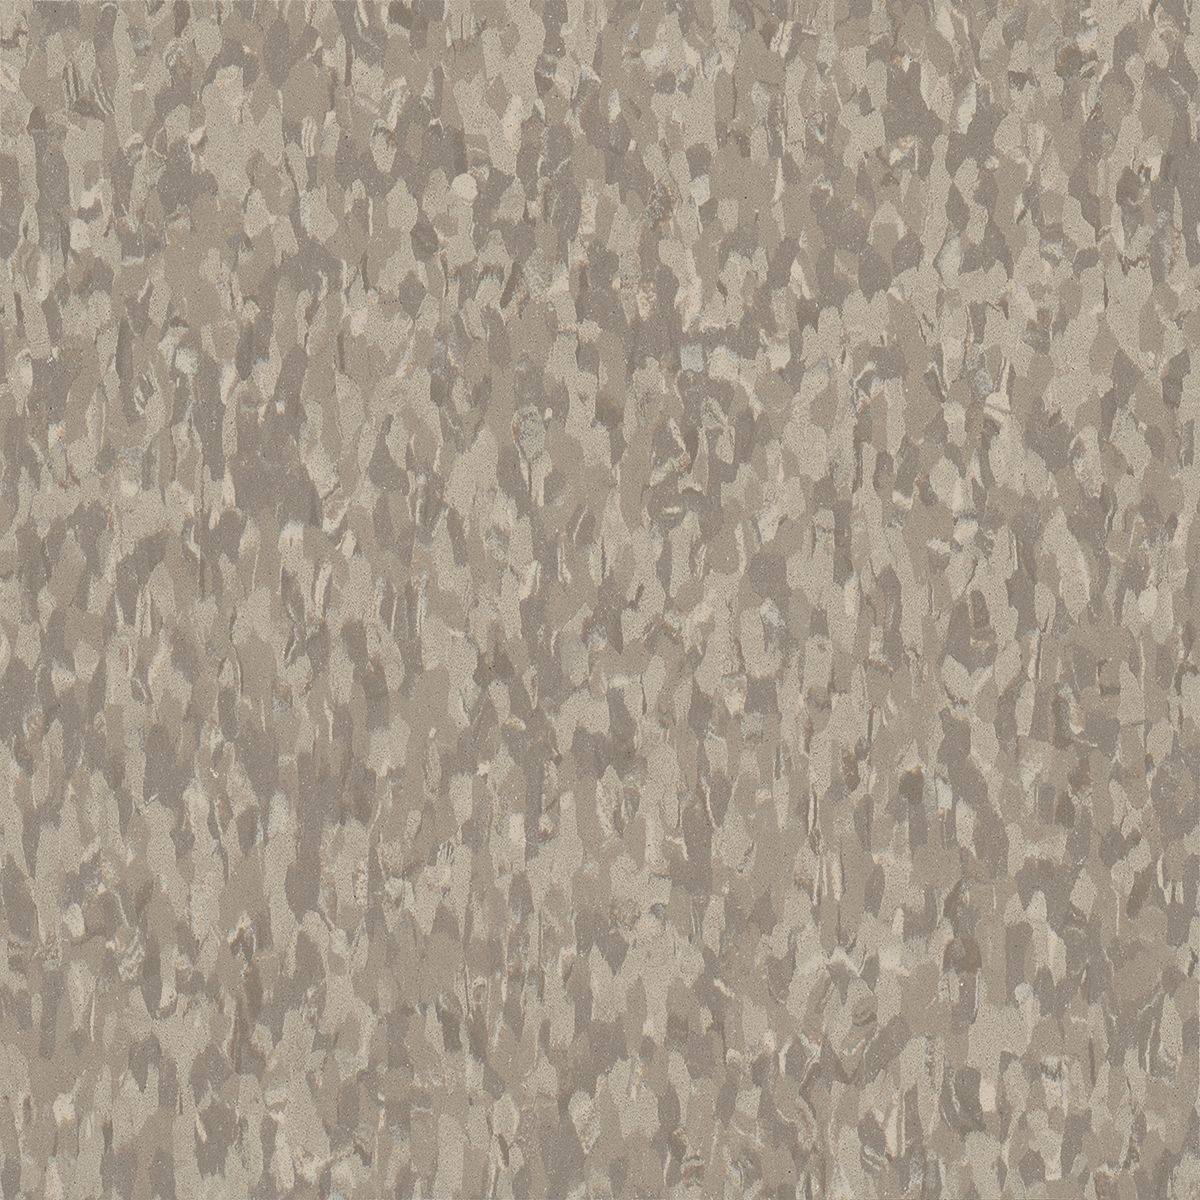 Standard Excelon Imperial Texture Linseed